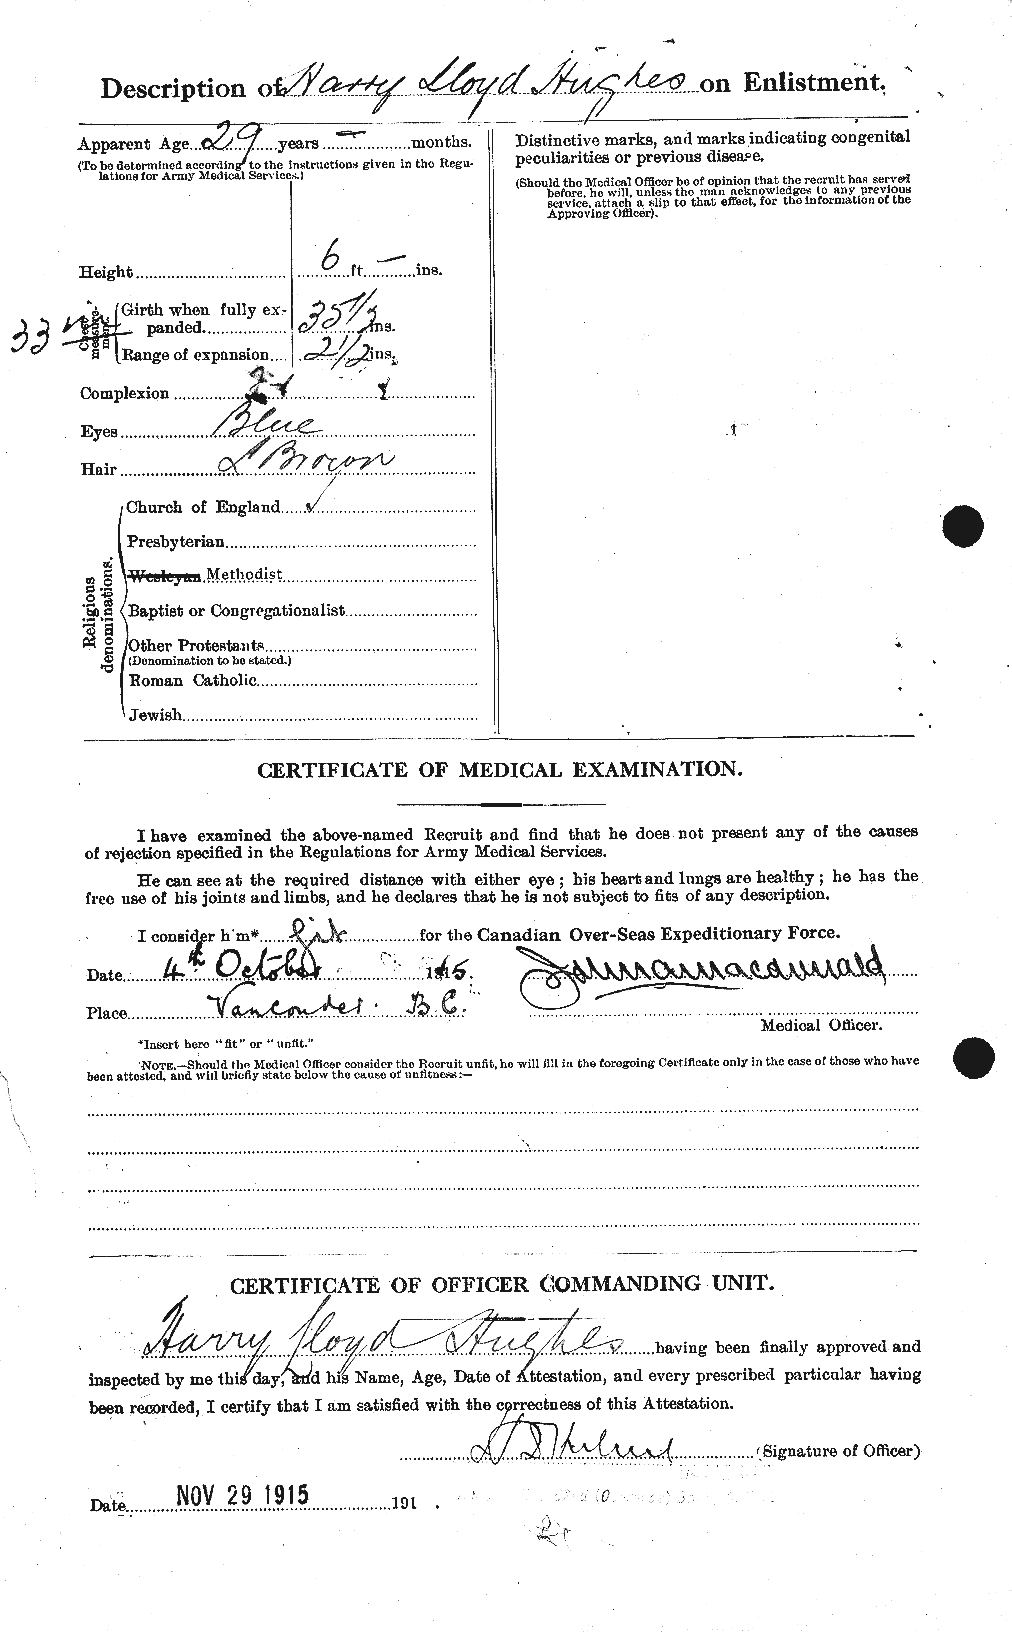 Personnel Records of the First World War - CEF 403873b